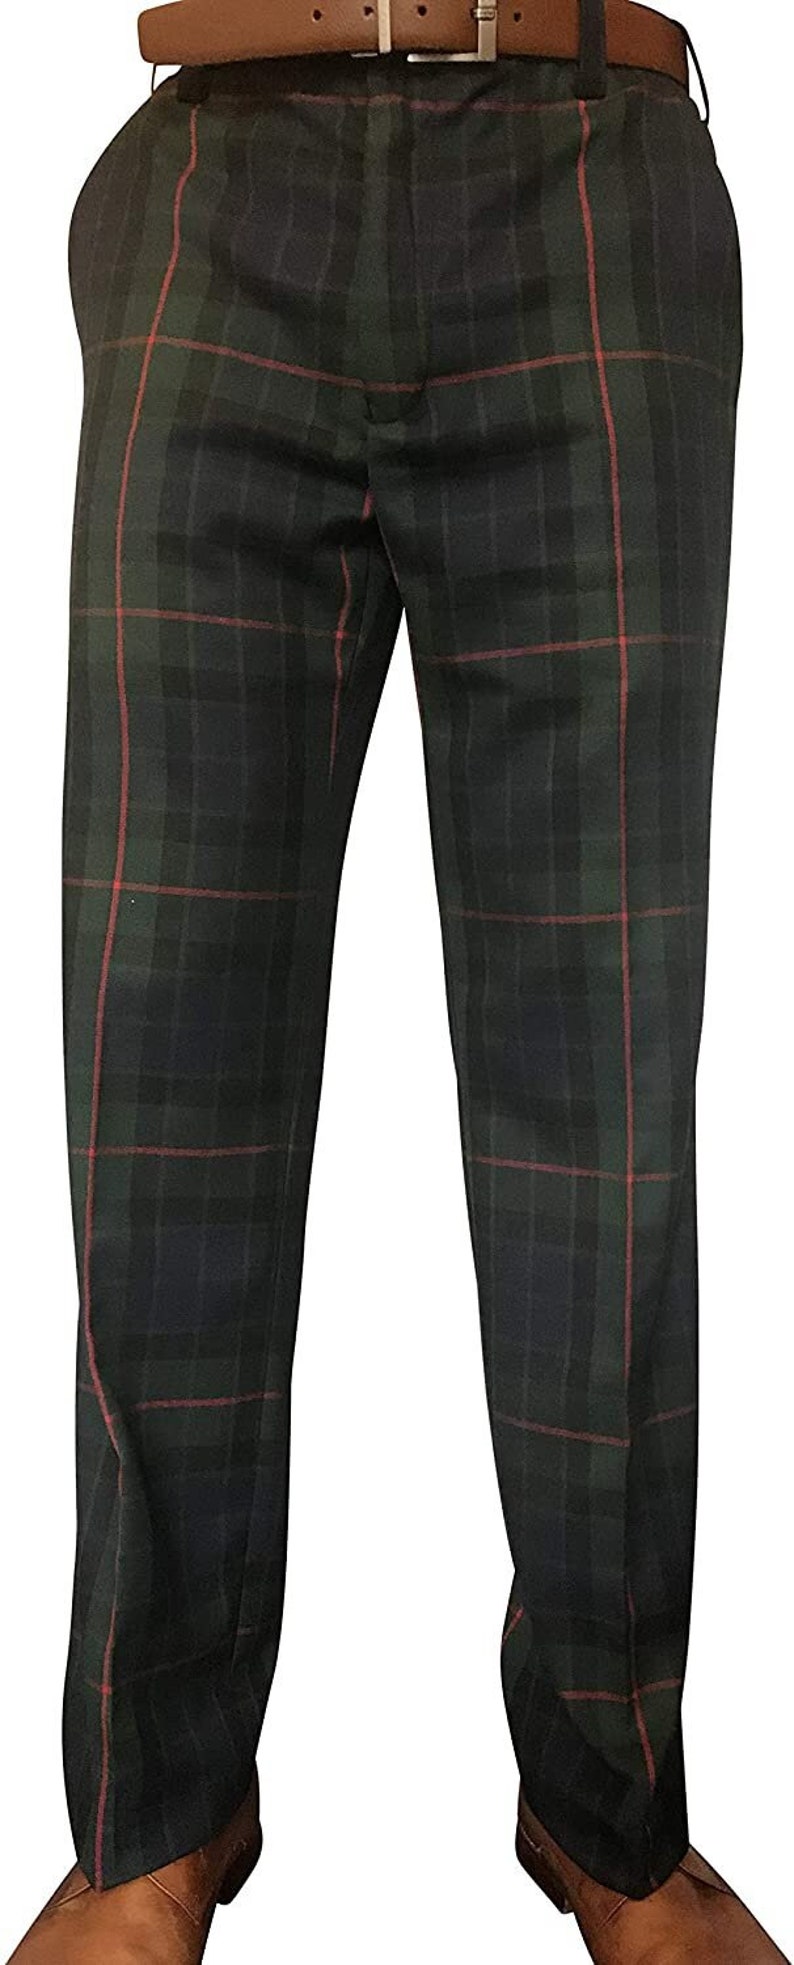 Gents Gunn Modern Clan Tartan Casual Trousers Perfect for Golf Or Dinner Parties image 1